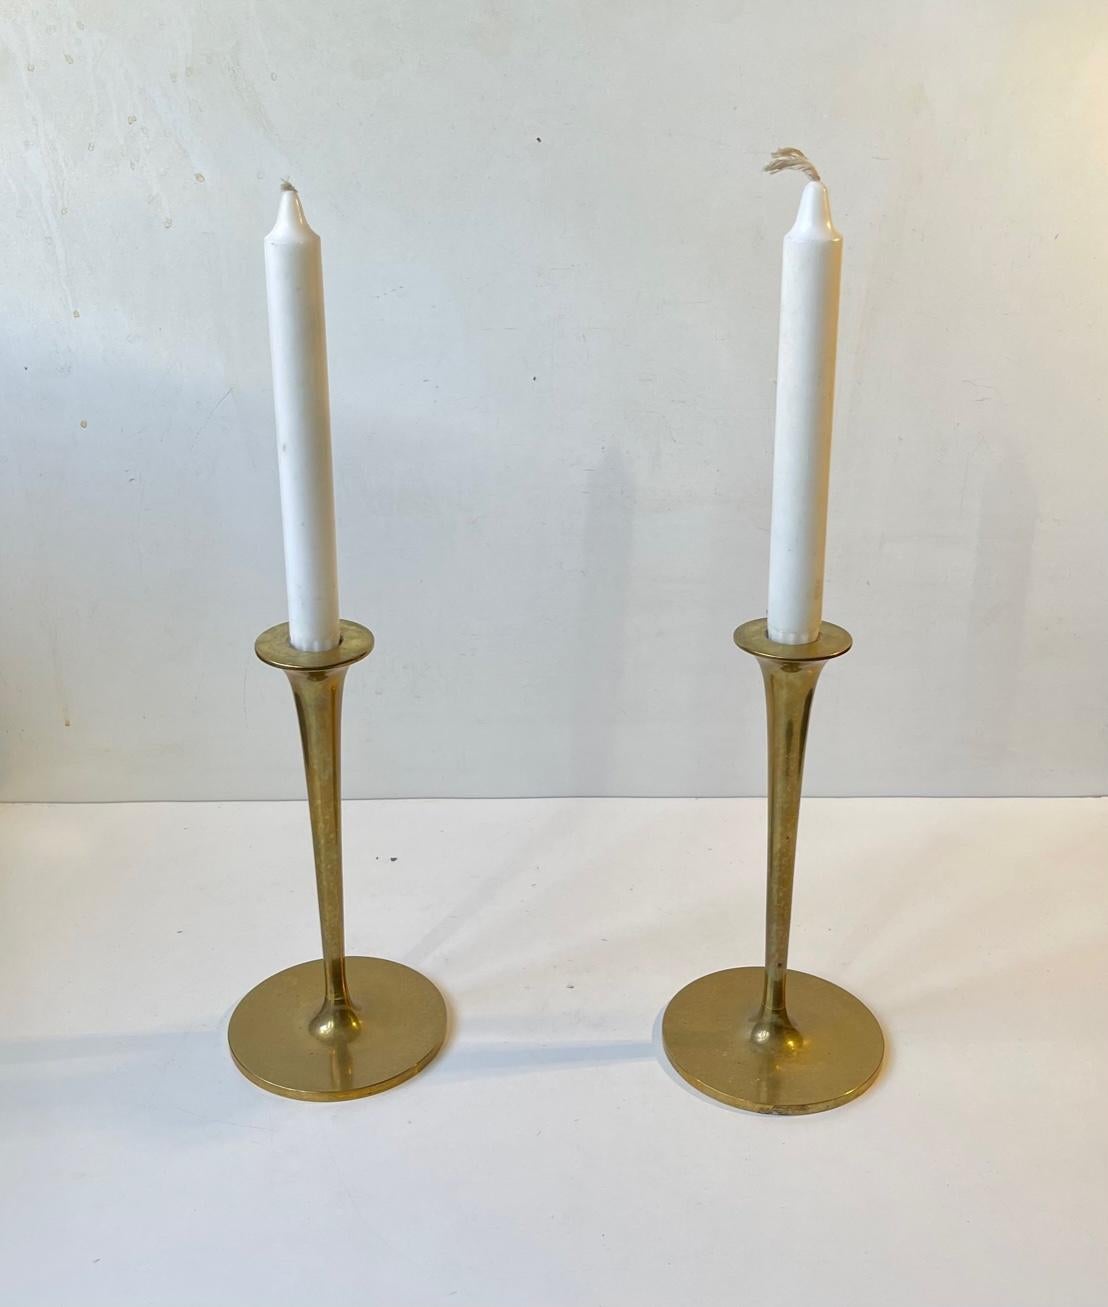 A pair of trumpet shaped brass candlesticks designed and manufactured in Scandinavia during the 1960s. The candlesticks are in a heavy quality and are to be fitted with regular sixed candles. They have not been polished recently and display patina.